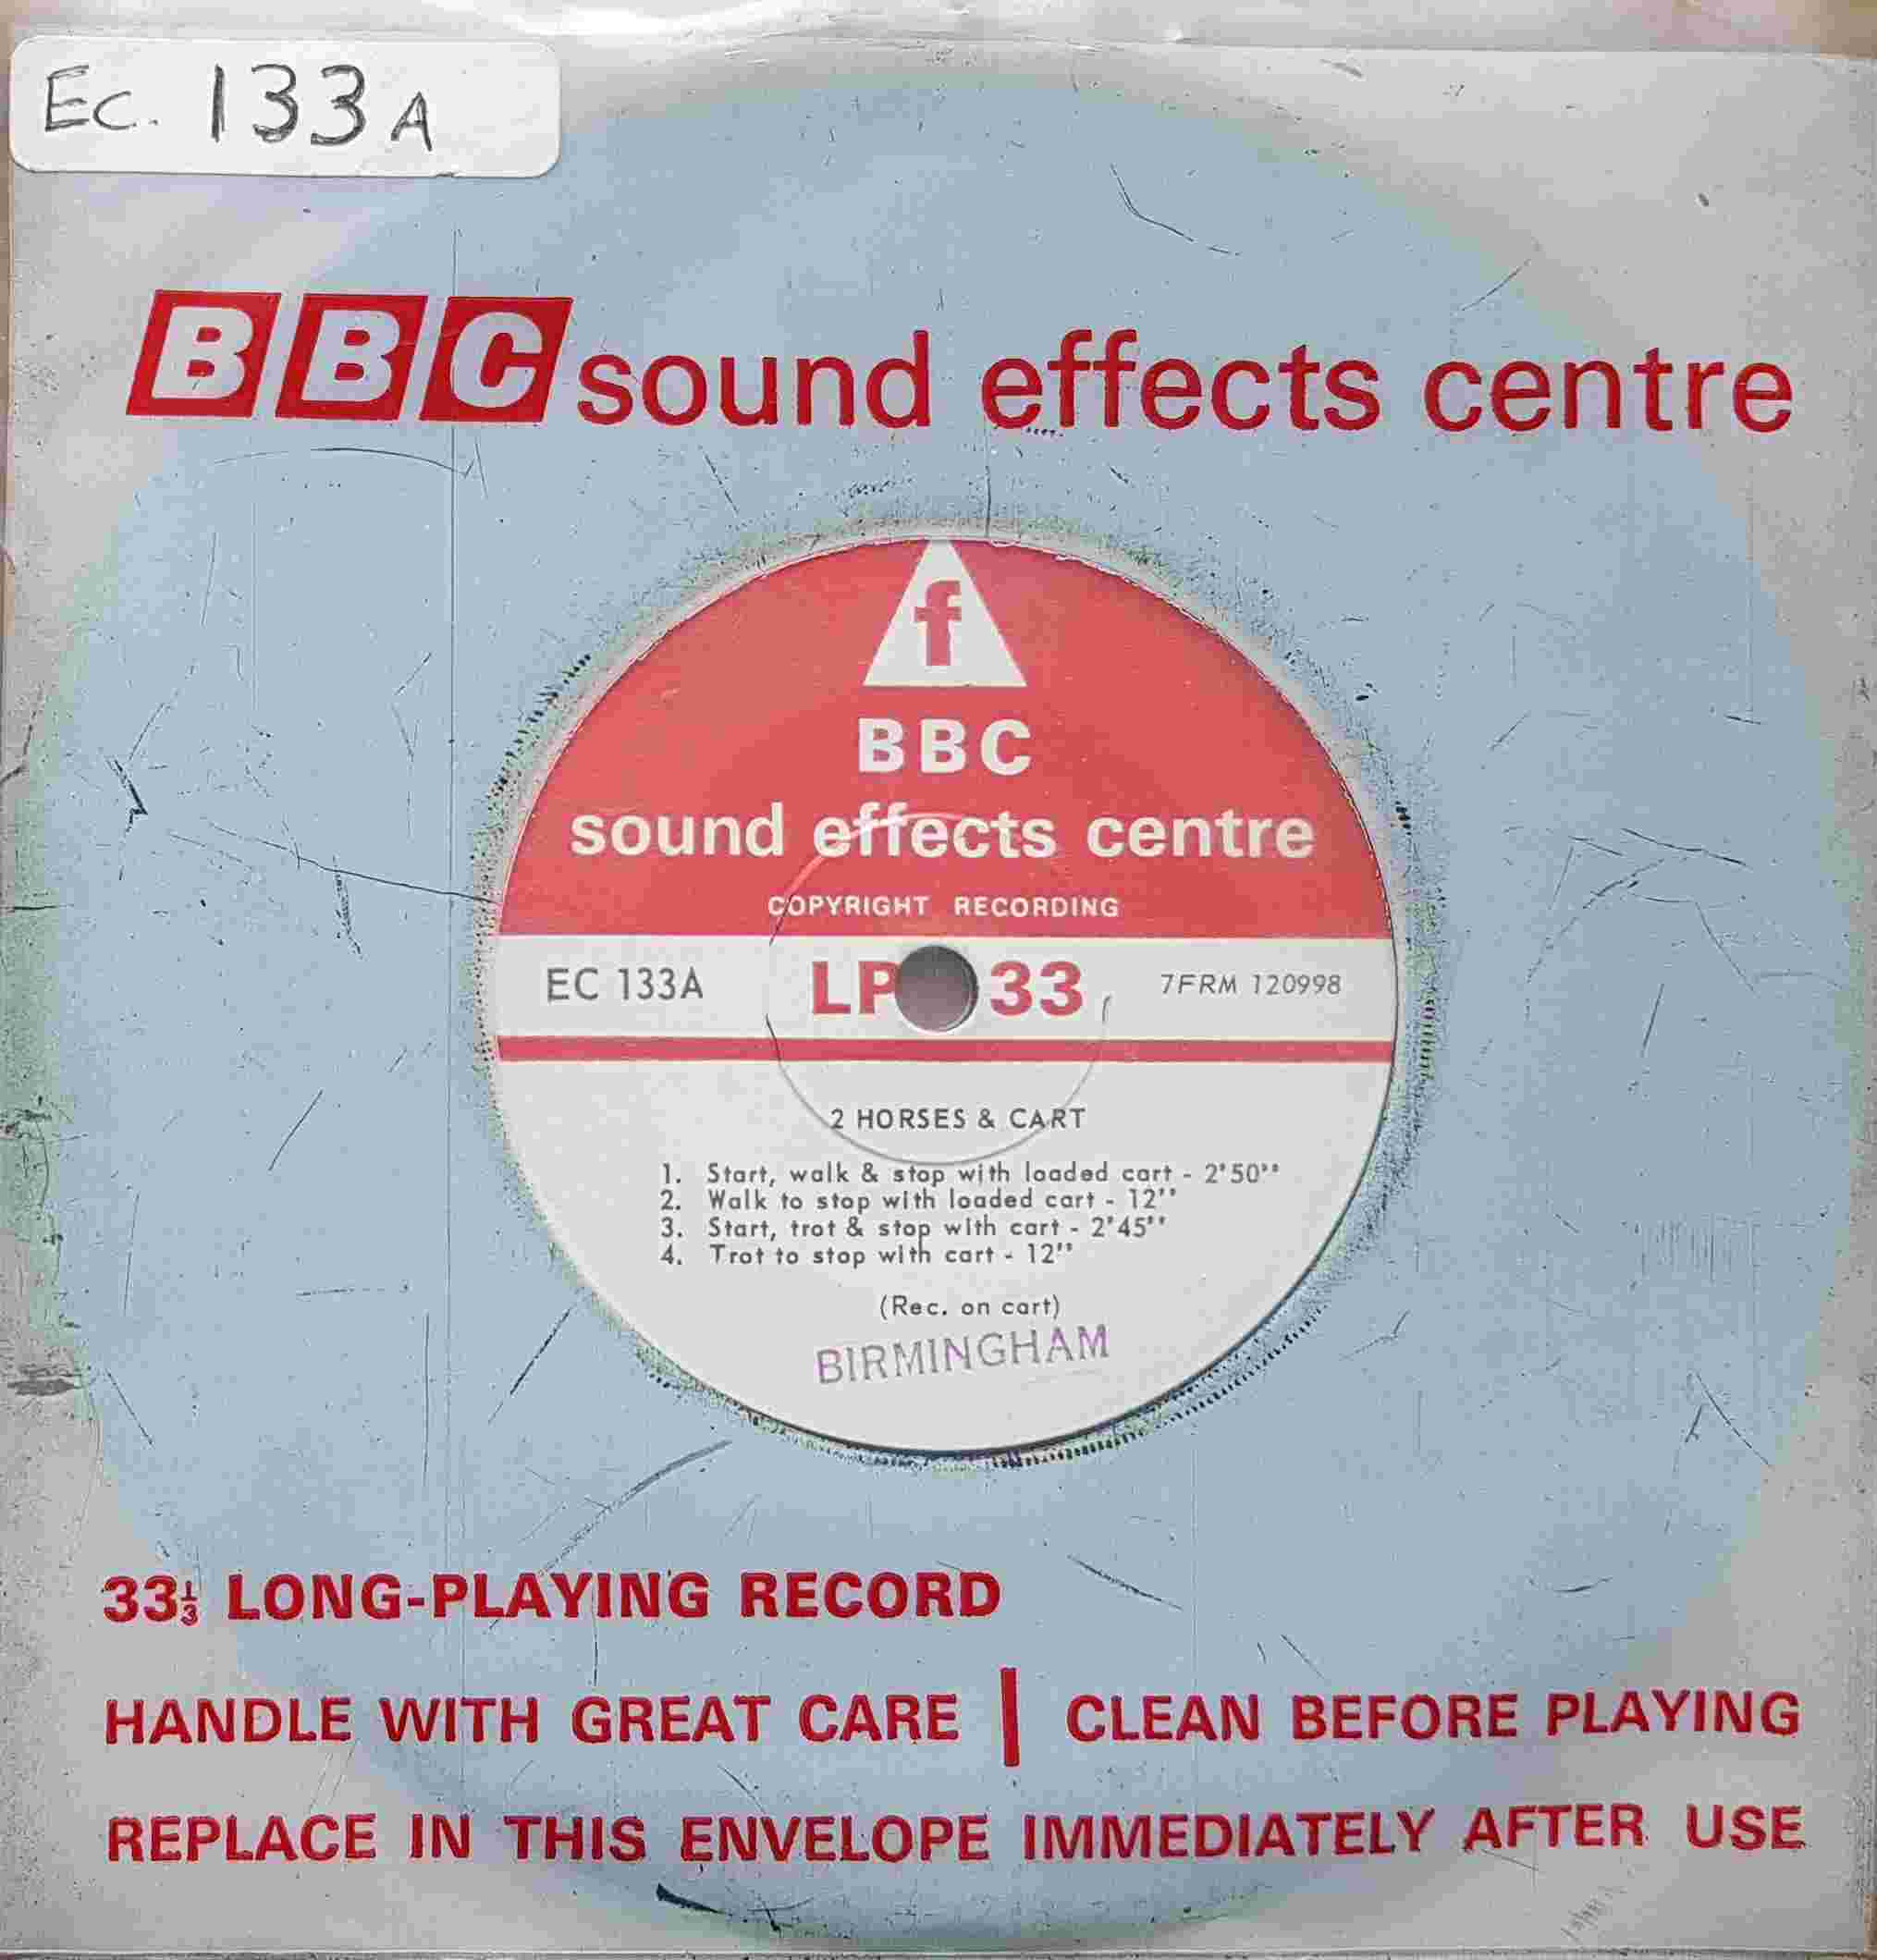 Picture of EC 133A Horses & cart (Recorded on cart) by artist Not registered from the BBC singles - Records and Tapes library